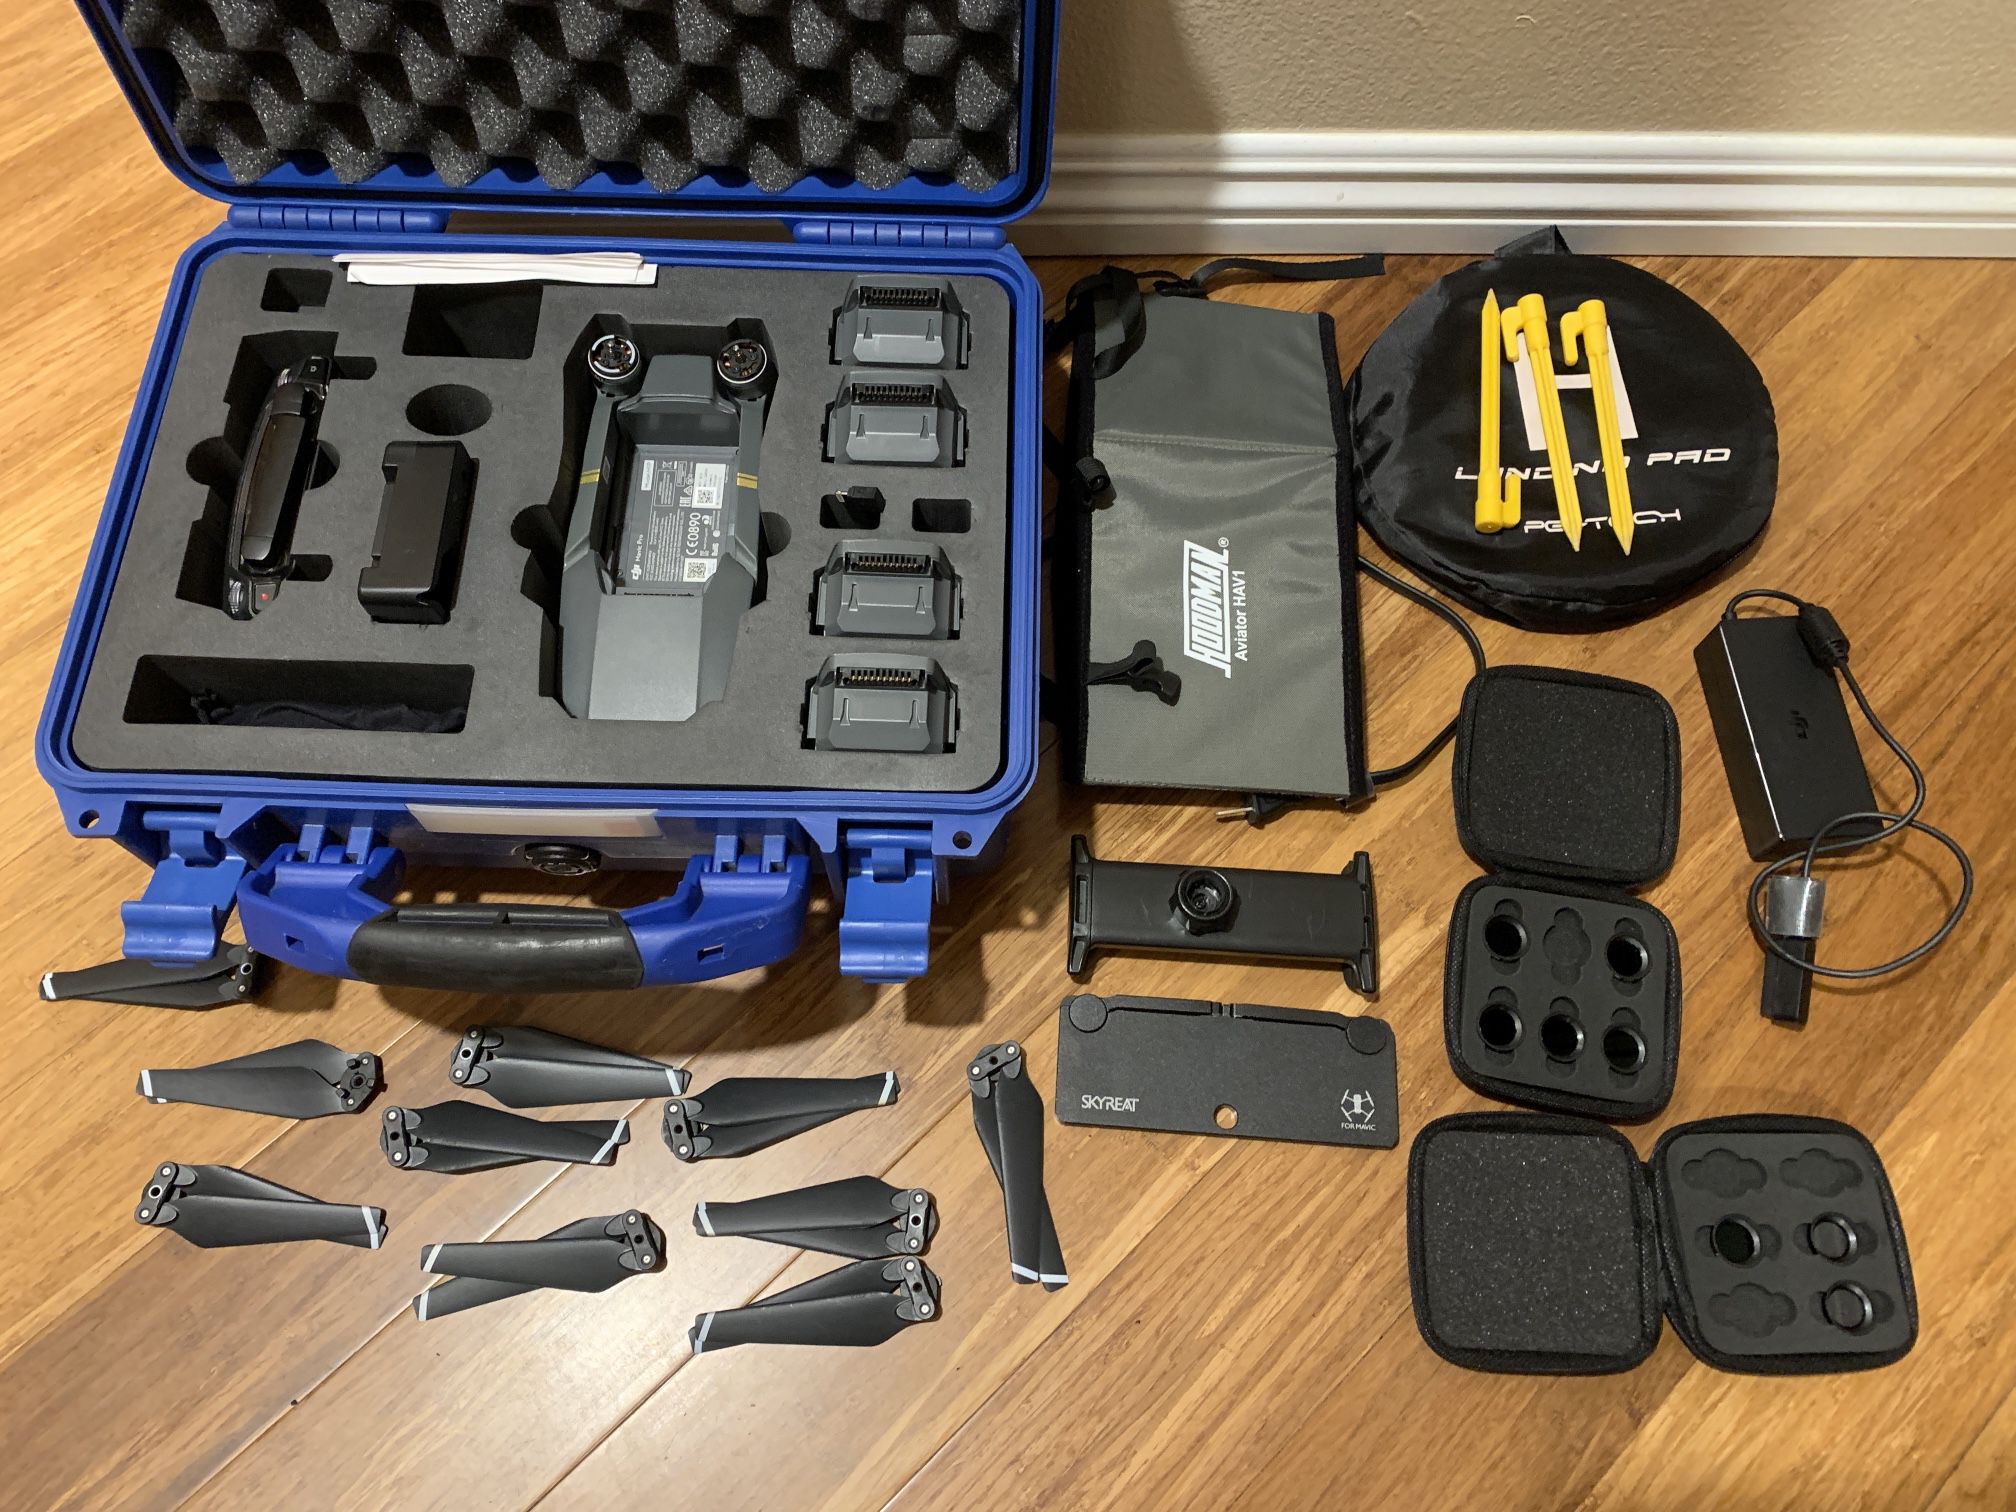 Drone DJI Mavic Pro like new with lots of accessories, Propeller Guard and Fly More Combo. ONLY 3 Hours of Total Flights.